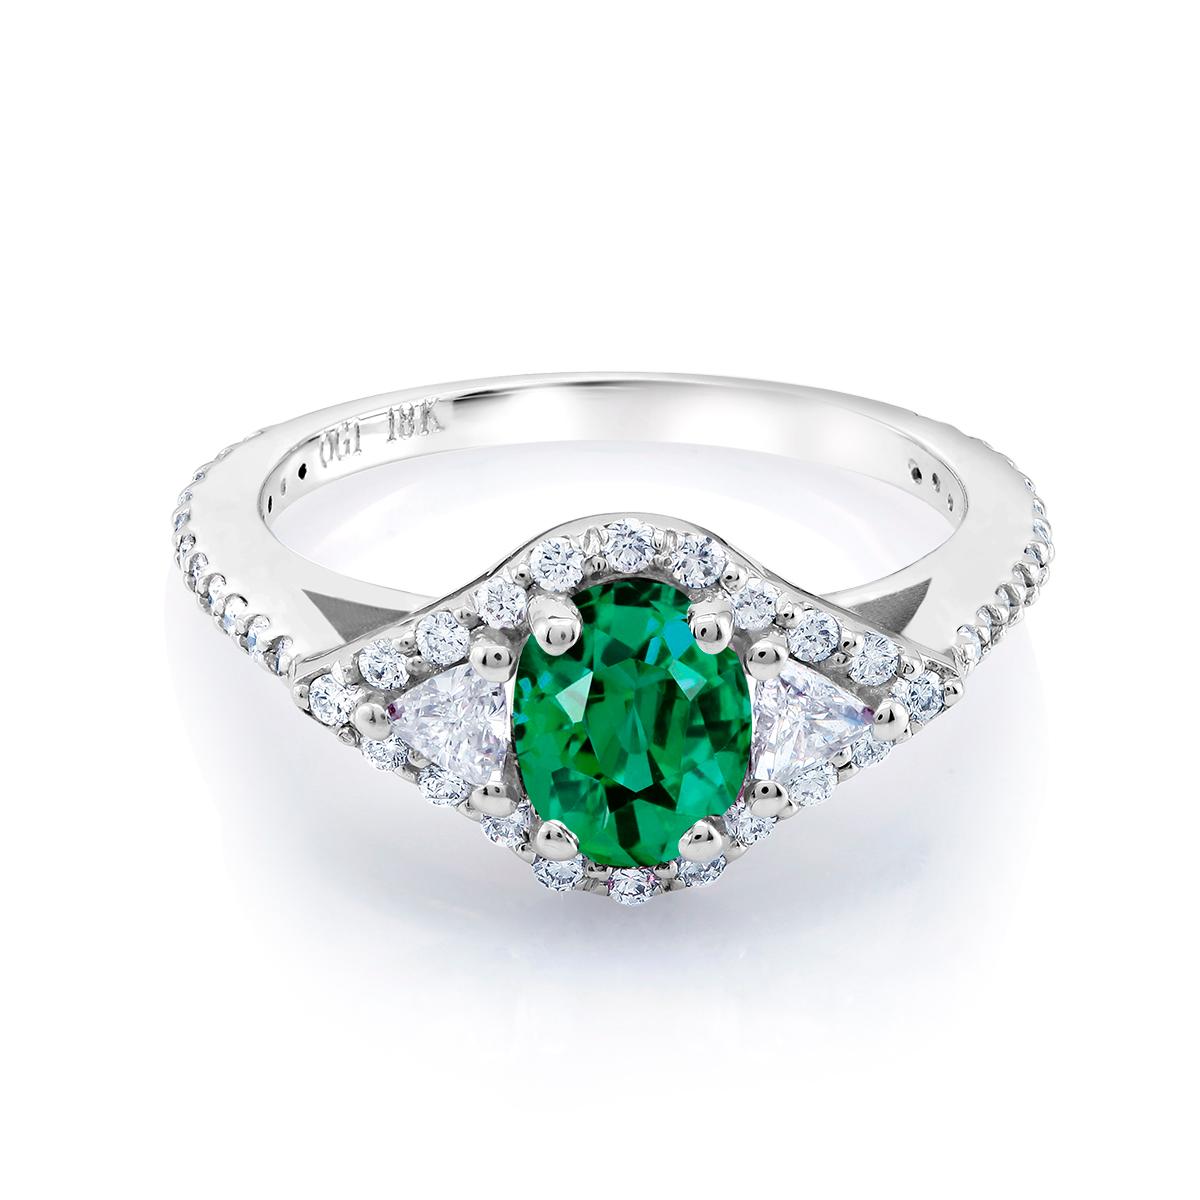 18 karat white gold emerald and diamond cocktail ring 
Ring finger size 6.5 
Diamond carat weight 0.45 
Trillion diamond carat weight 0.25 
Emerald carat total weight 0.98
Diamond quality G VS
One of a kind ring 
New ring 
Ring can be resized 
Our